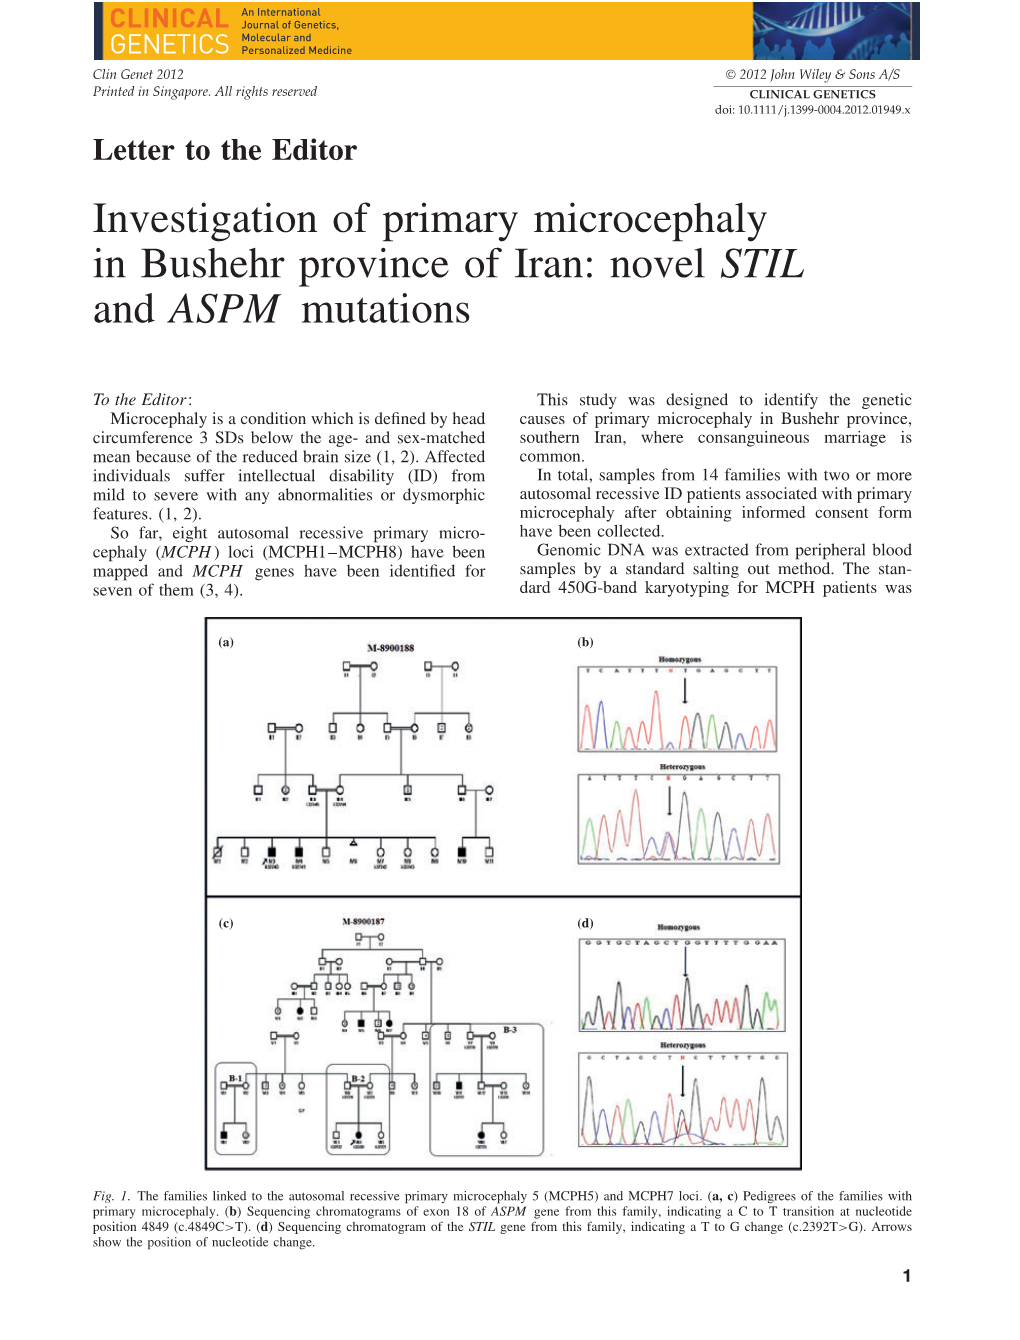 Investigation of Primary Microcephaly in Bushehr Province of Iran: Novel STIL and ASPM Mutations